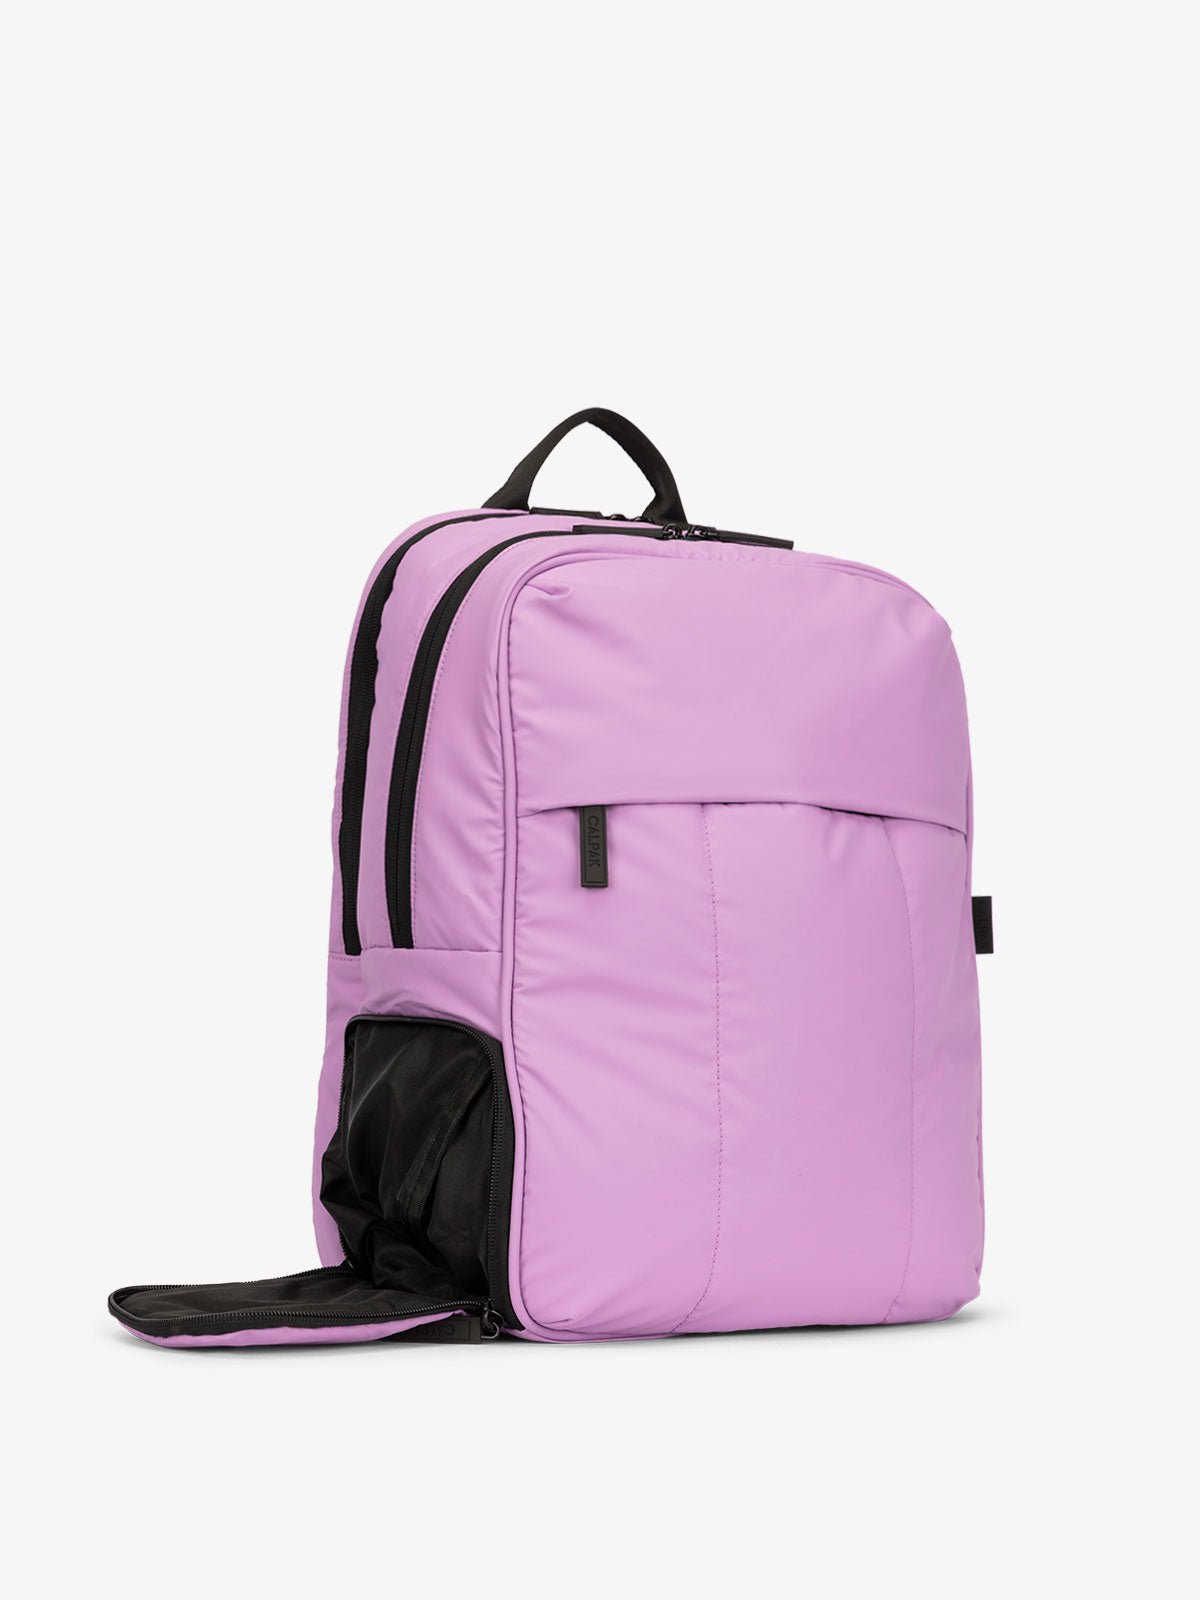 CALPAK Luka Laptop travel Backpack with shoe compartment in light purple lilac